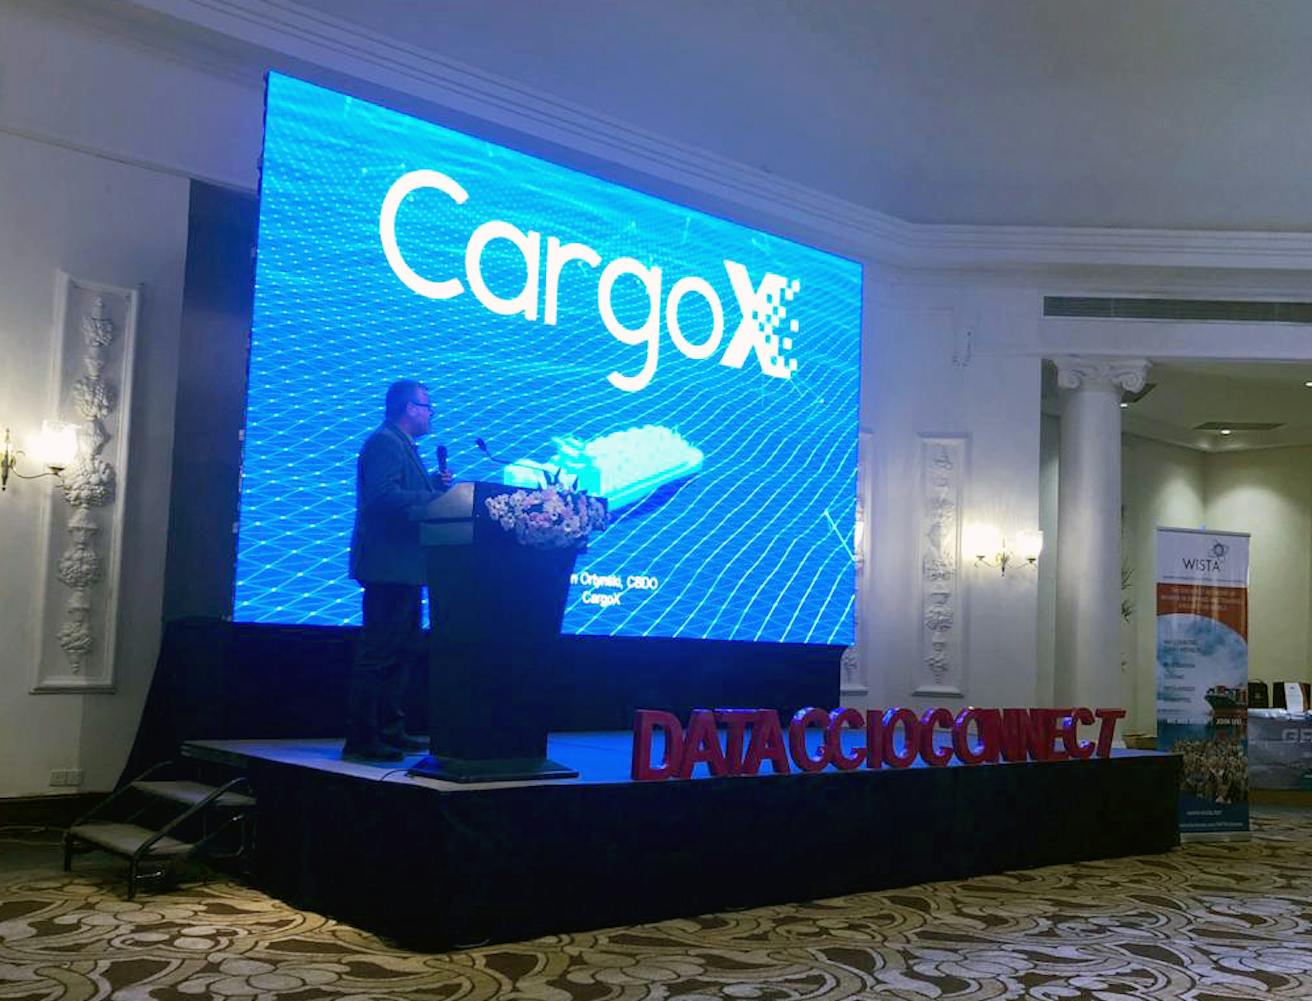 CargoX Smart B/L™ presented to maritime executives at #DataccioConnect Colombo